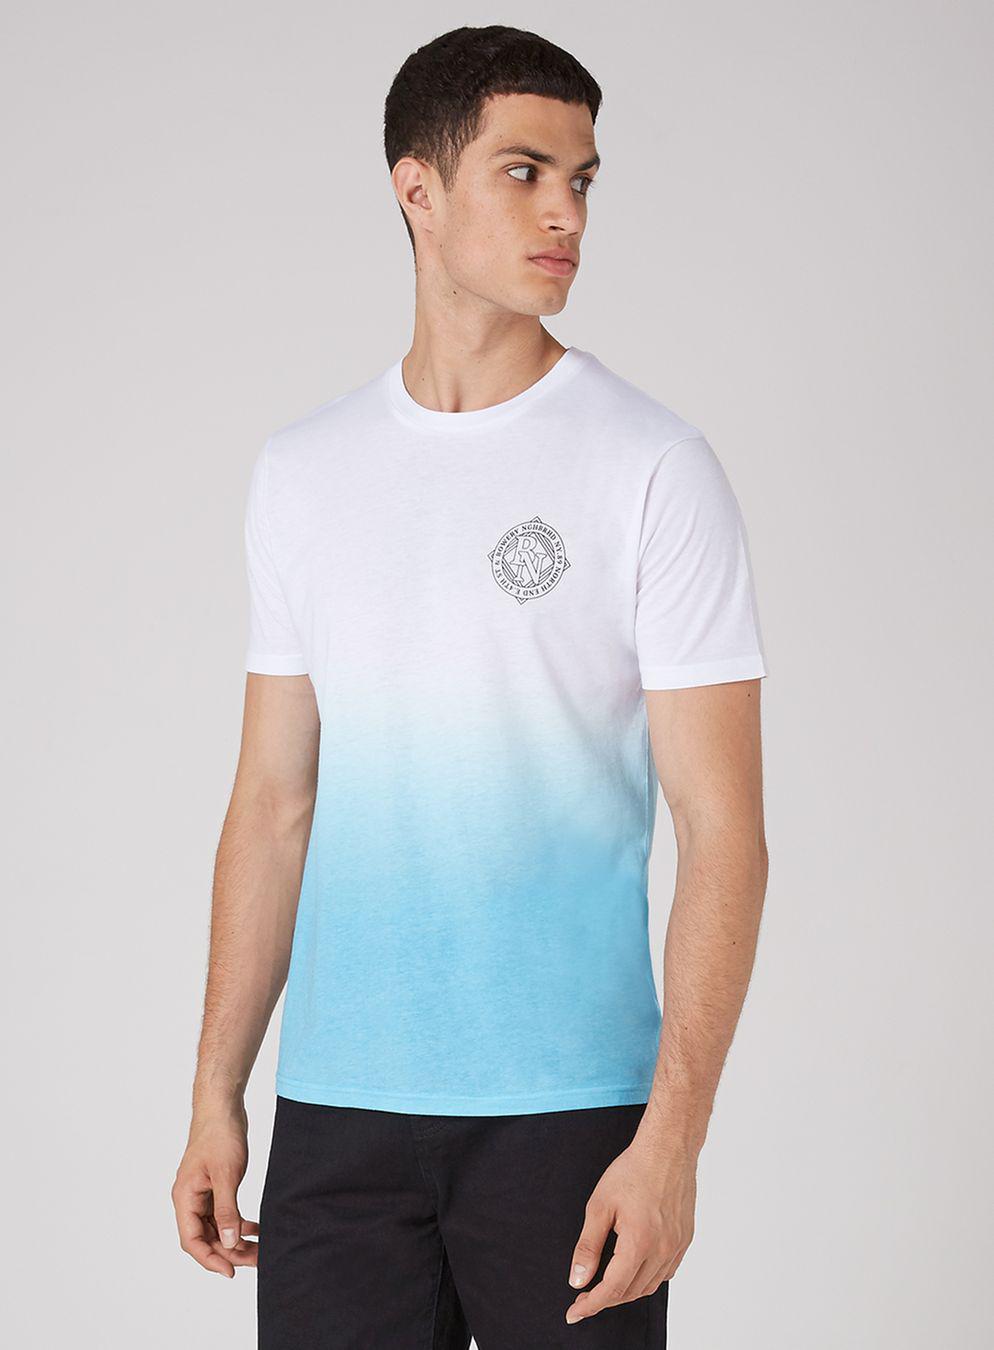 TOPMAN Synthetic White And Blue Slim Fit T-shirt for Men - Lyst